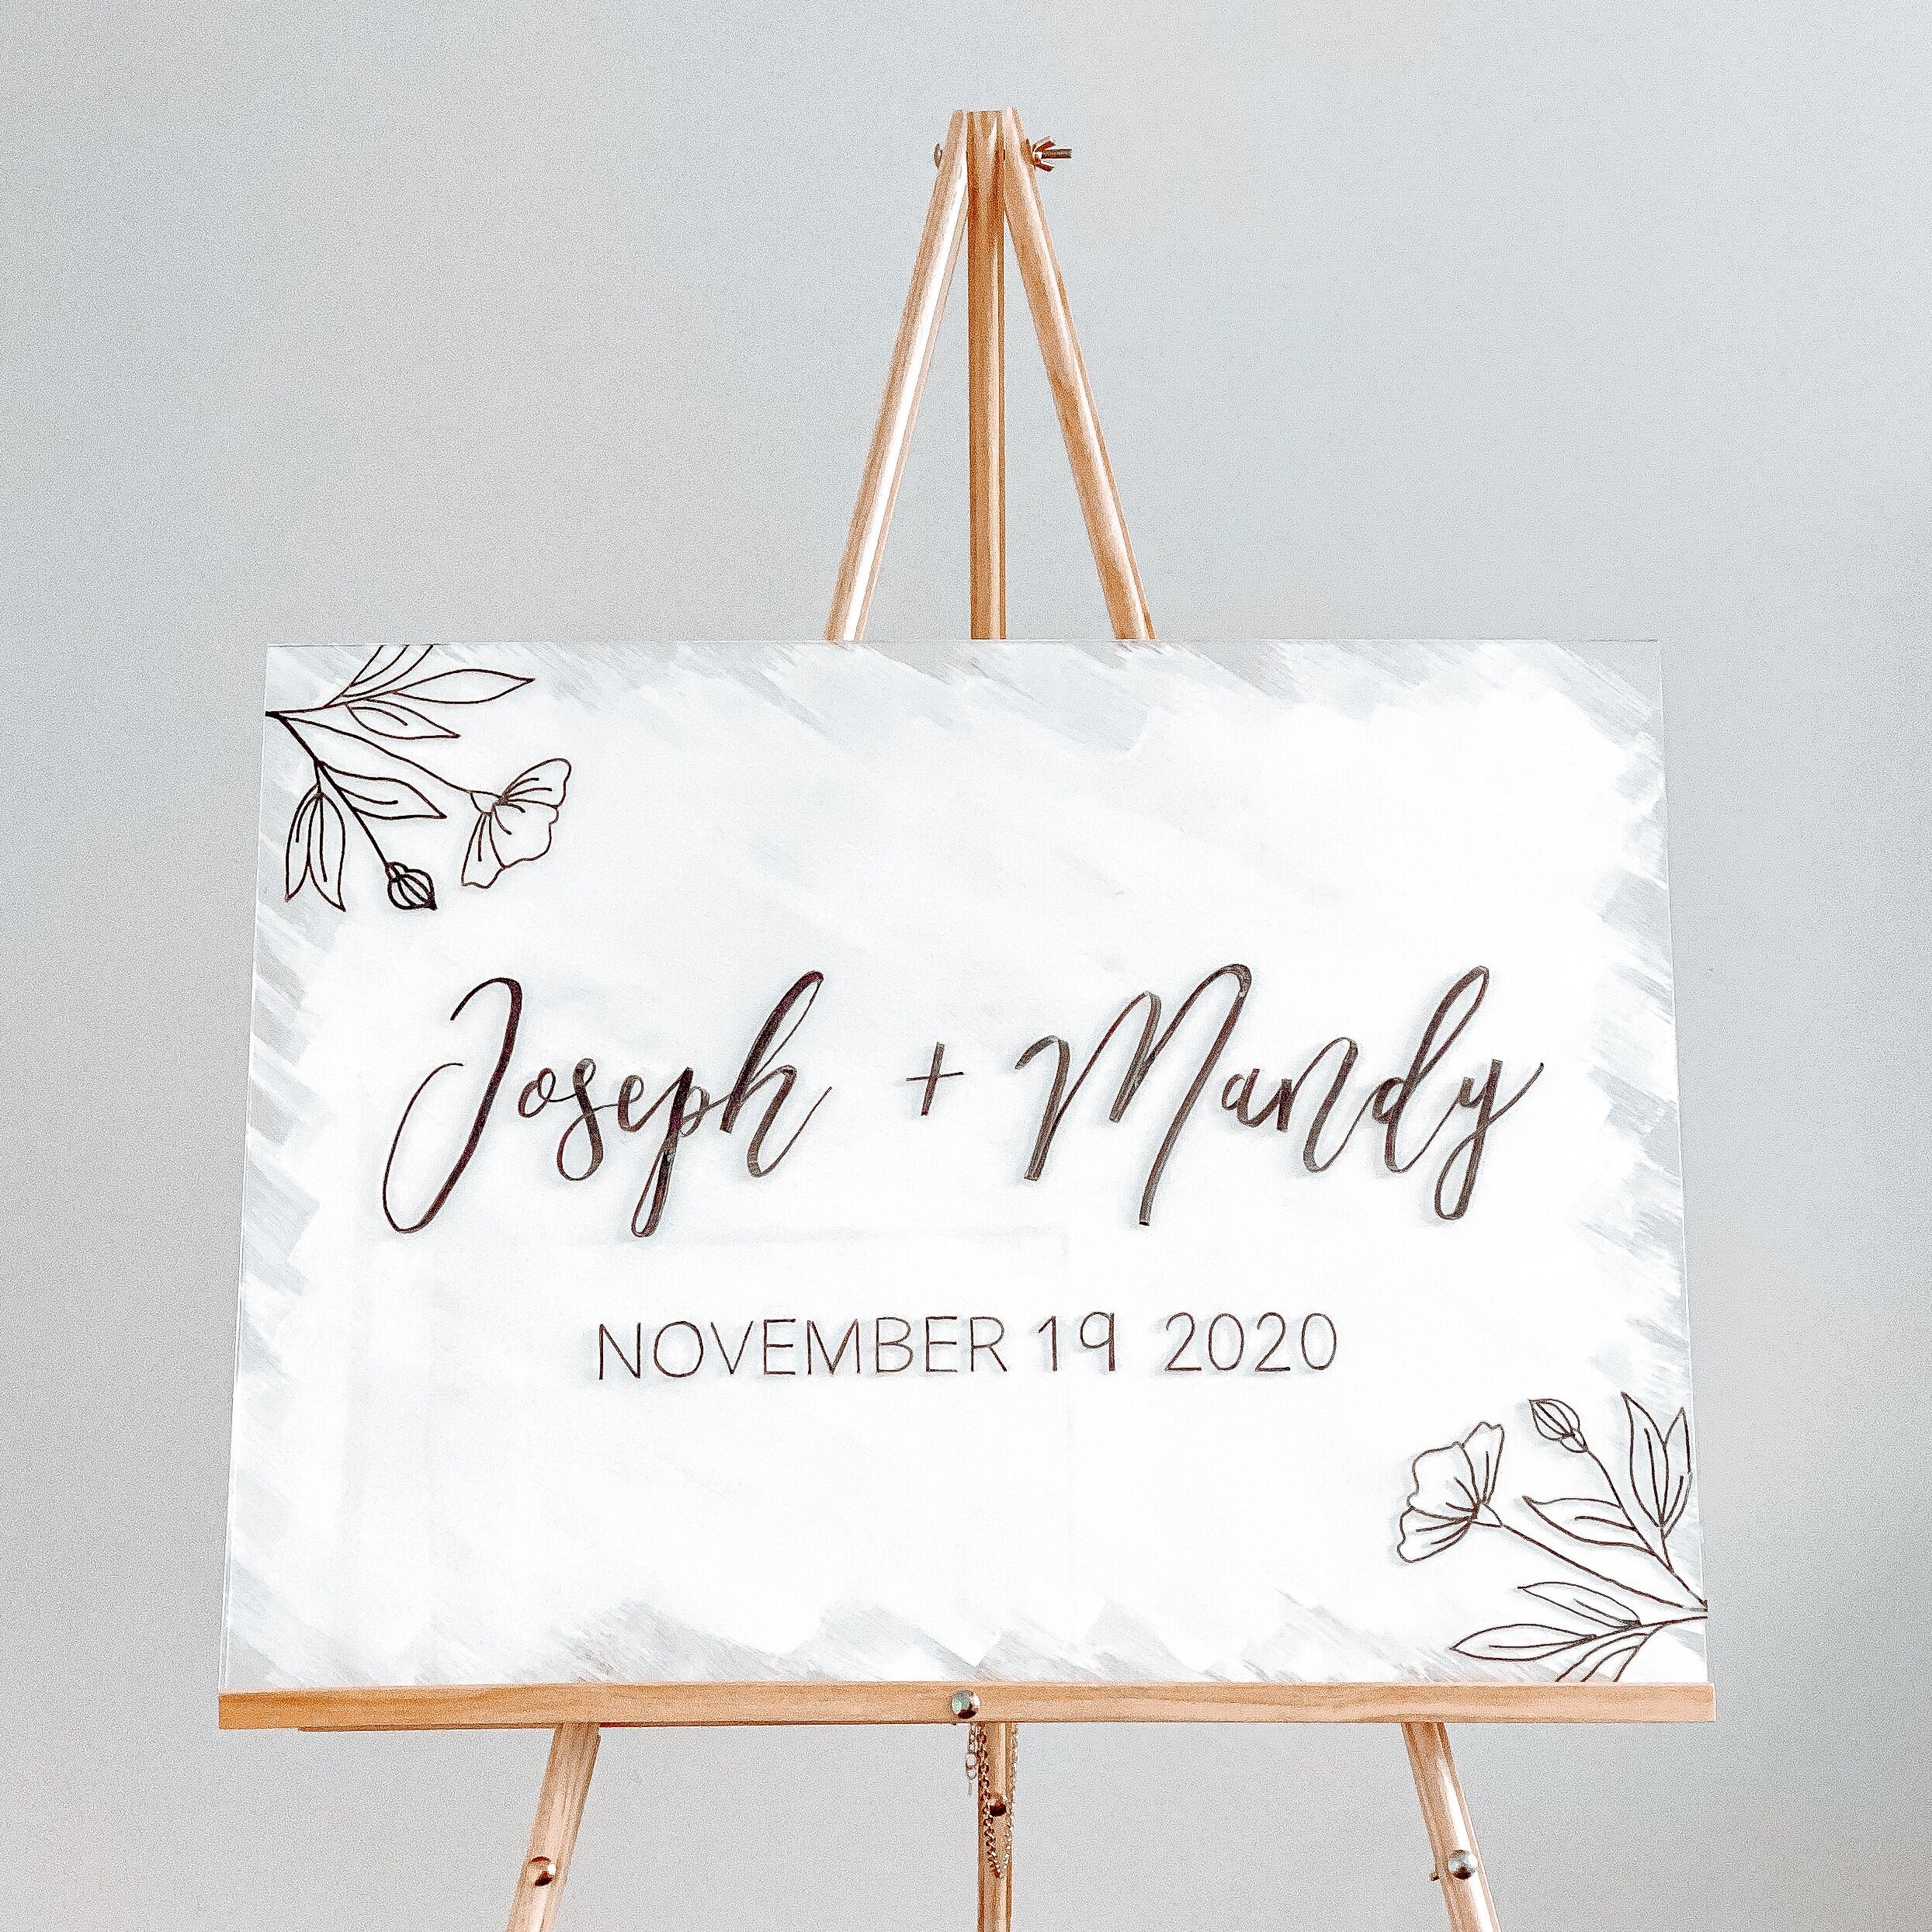 Acrylic Wedding Welcome Sign Blush Blooms Design